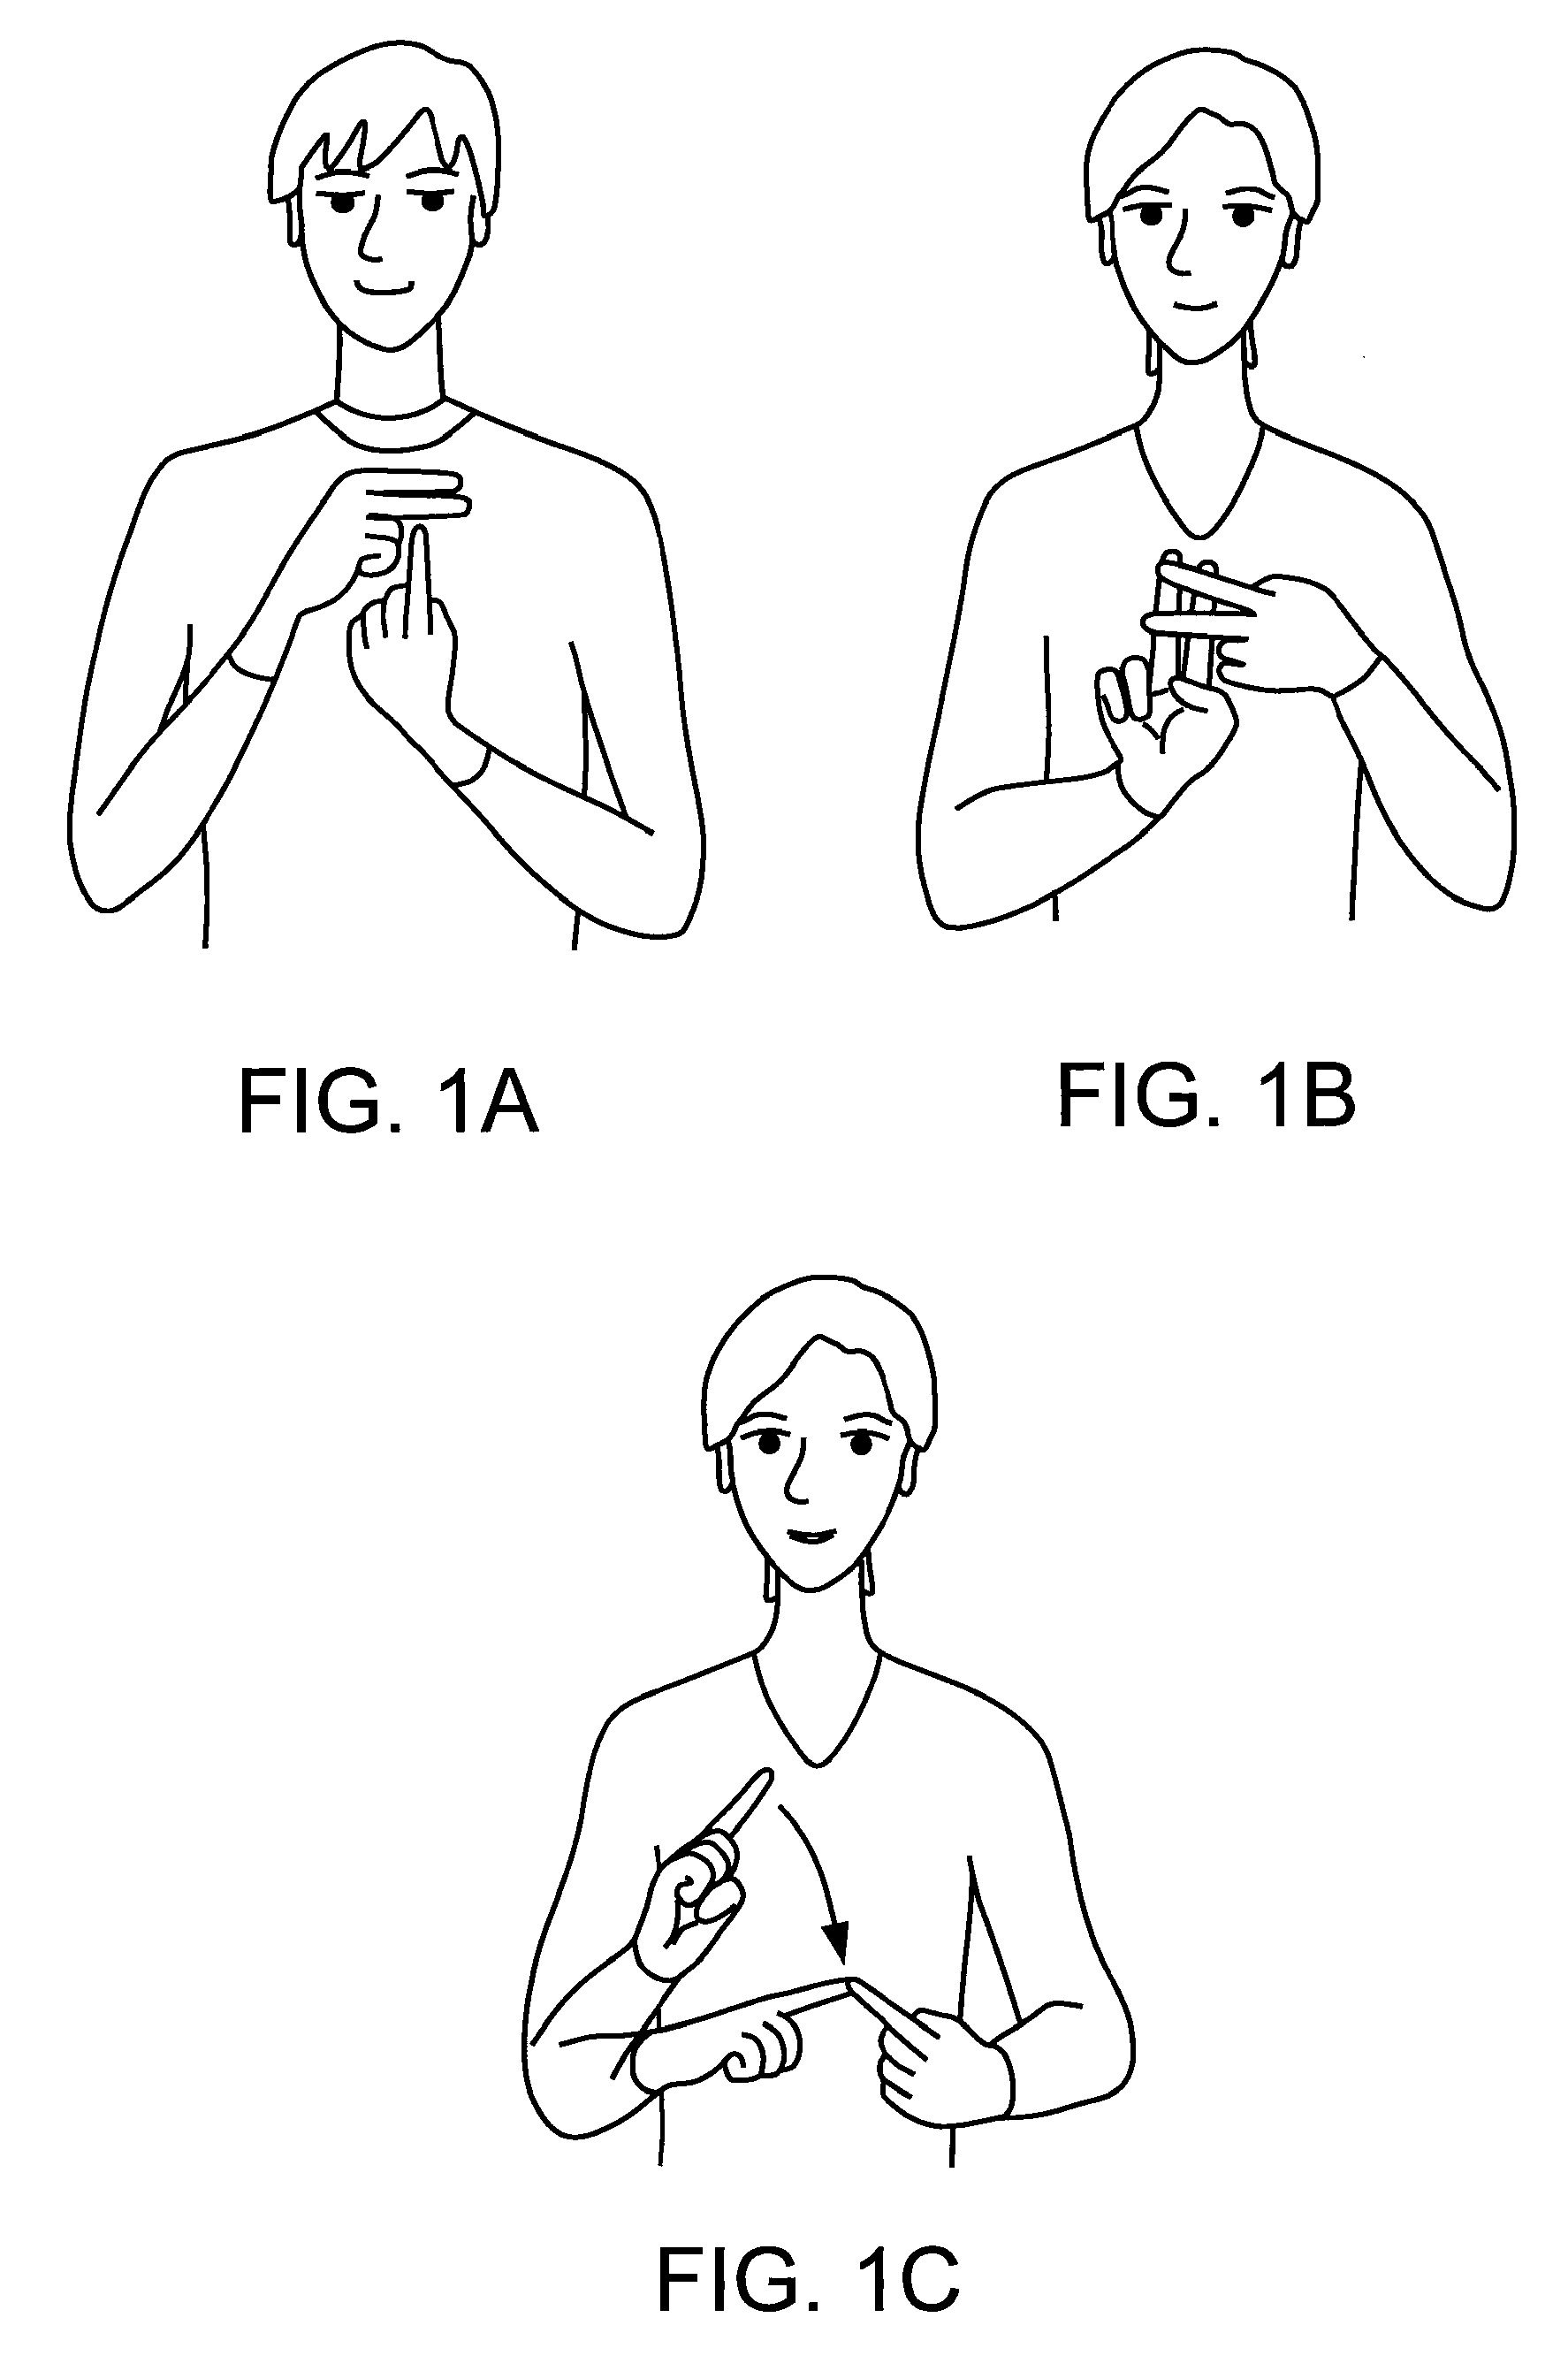 Hand sign recognition using label assignment